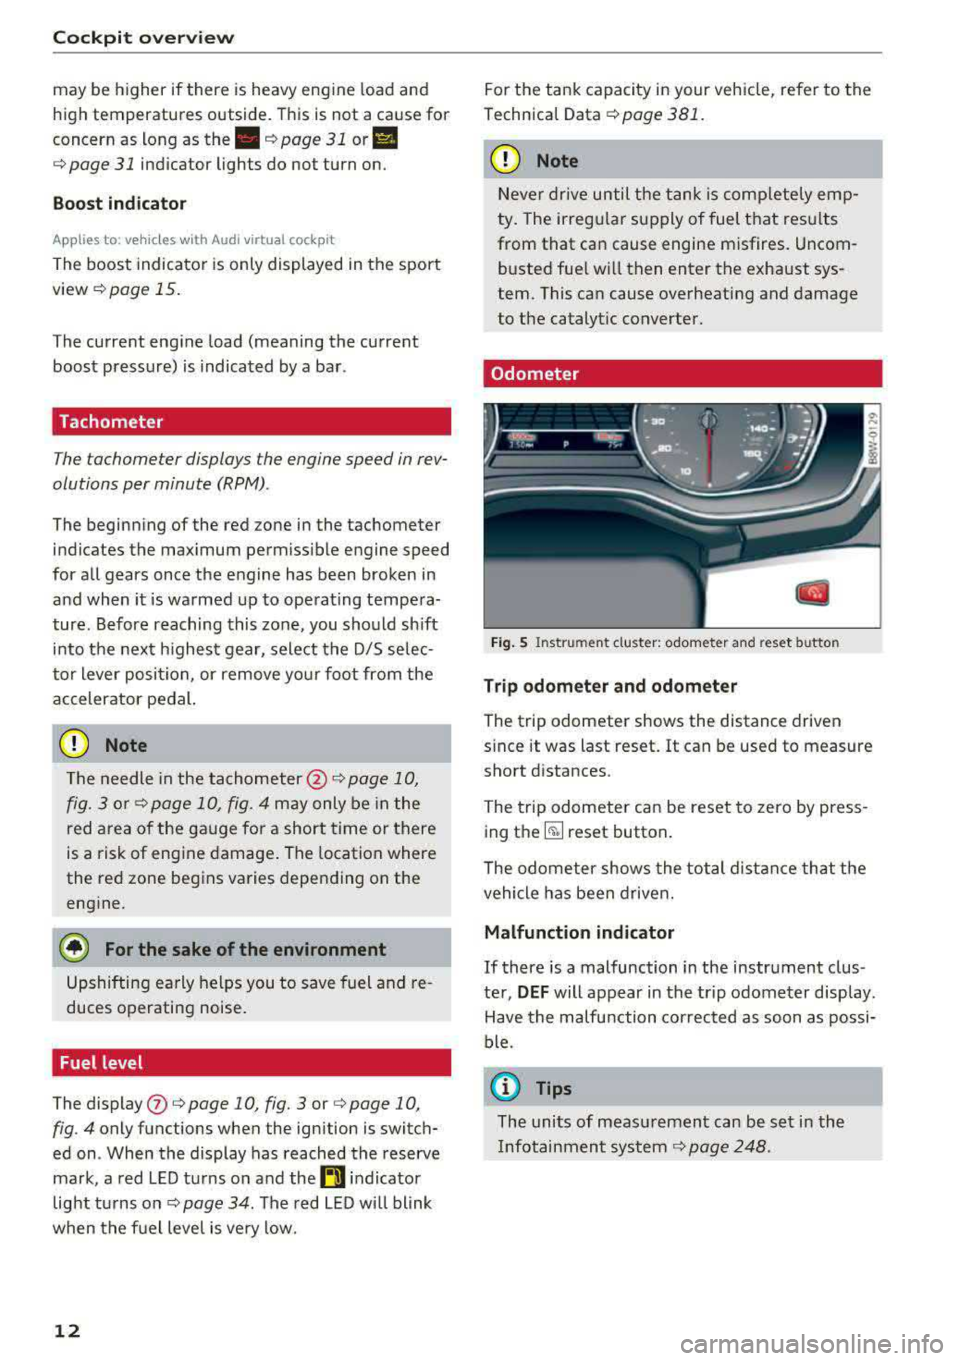 AUDI A4 2018  Owners Manual Cockpit overv iew 
may  be  higher  if there  is heavy  eng ine  load  and 
high  temperatures  outside . This is  not  a  cause  for 
concern  as  long  as 
the .¢ page  31 or II 
¢ page  31 indica